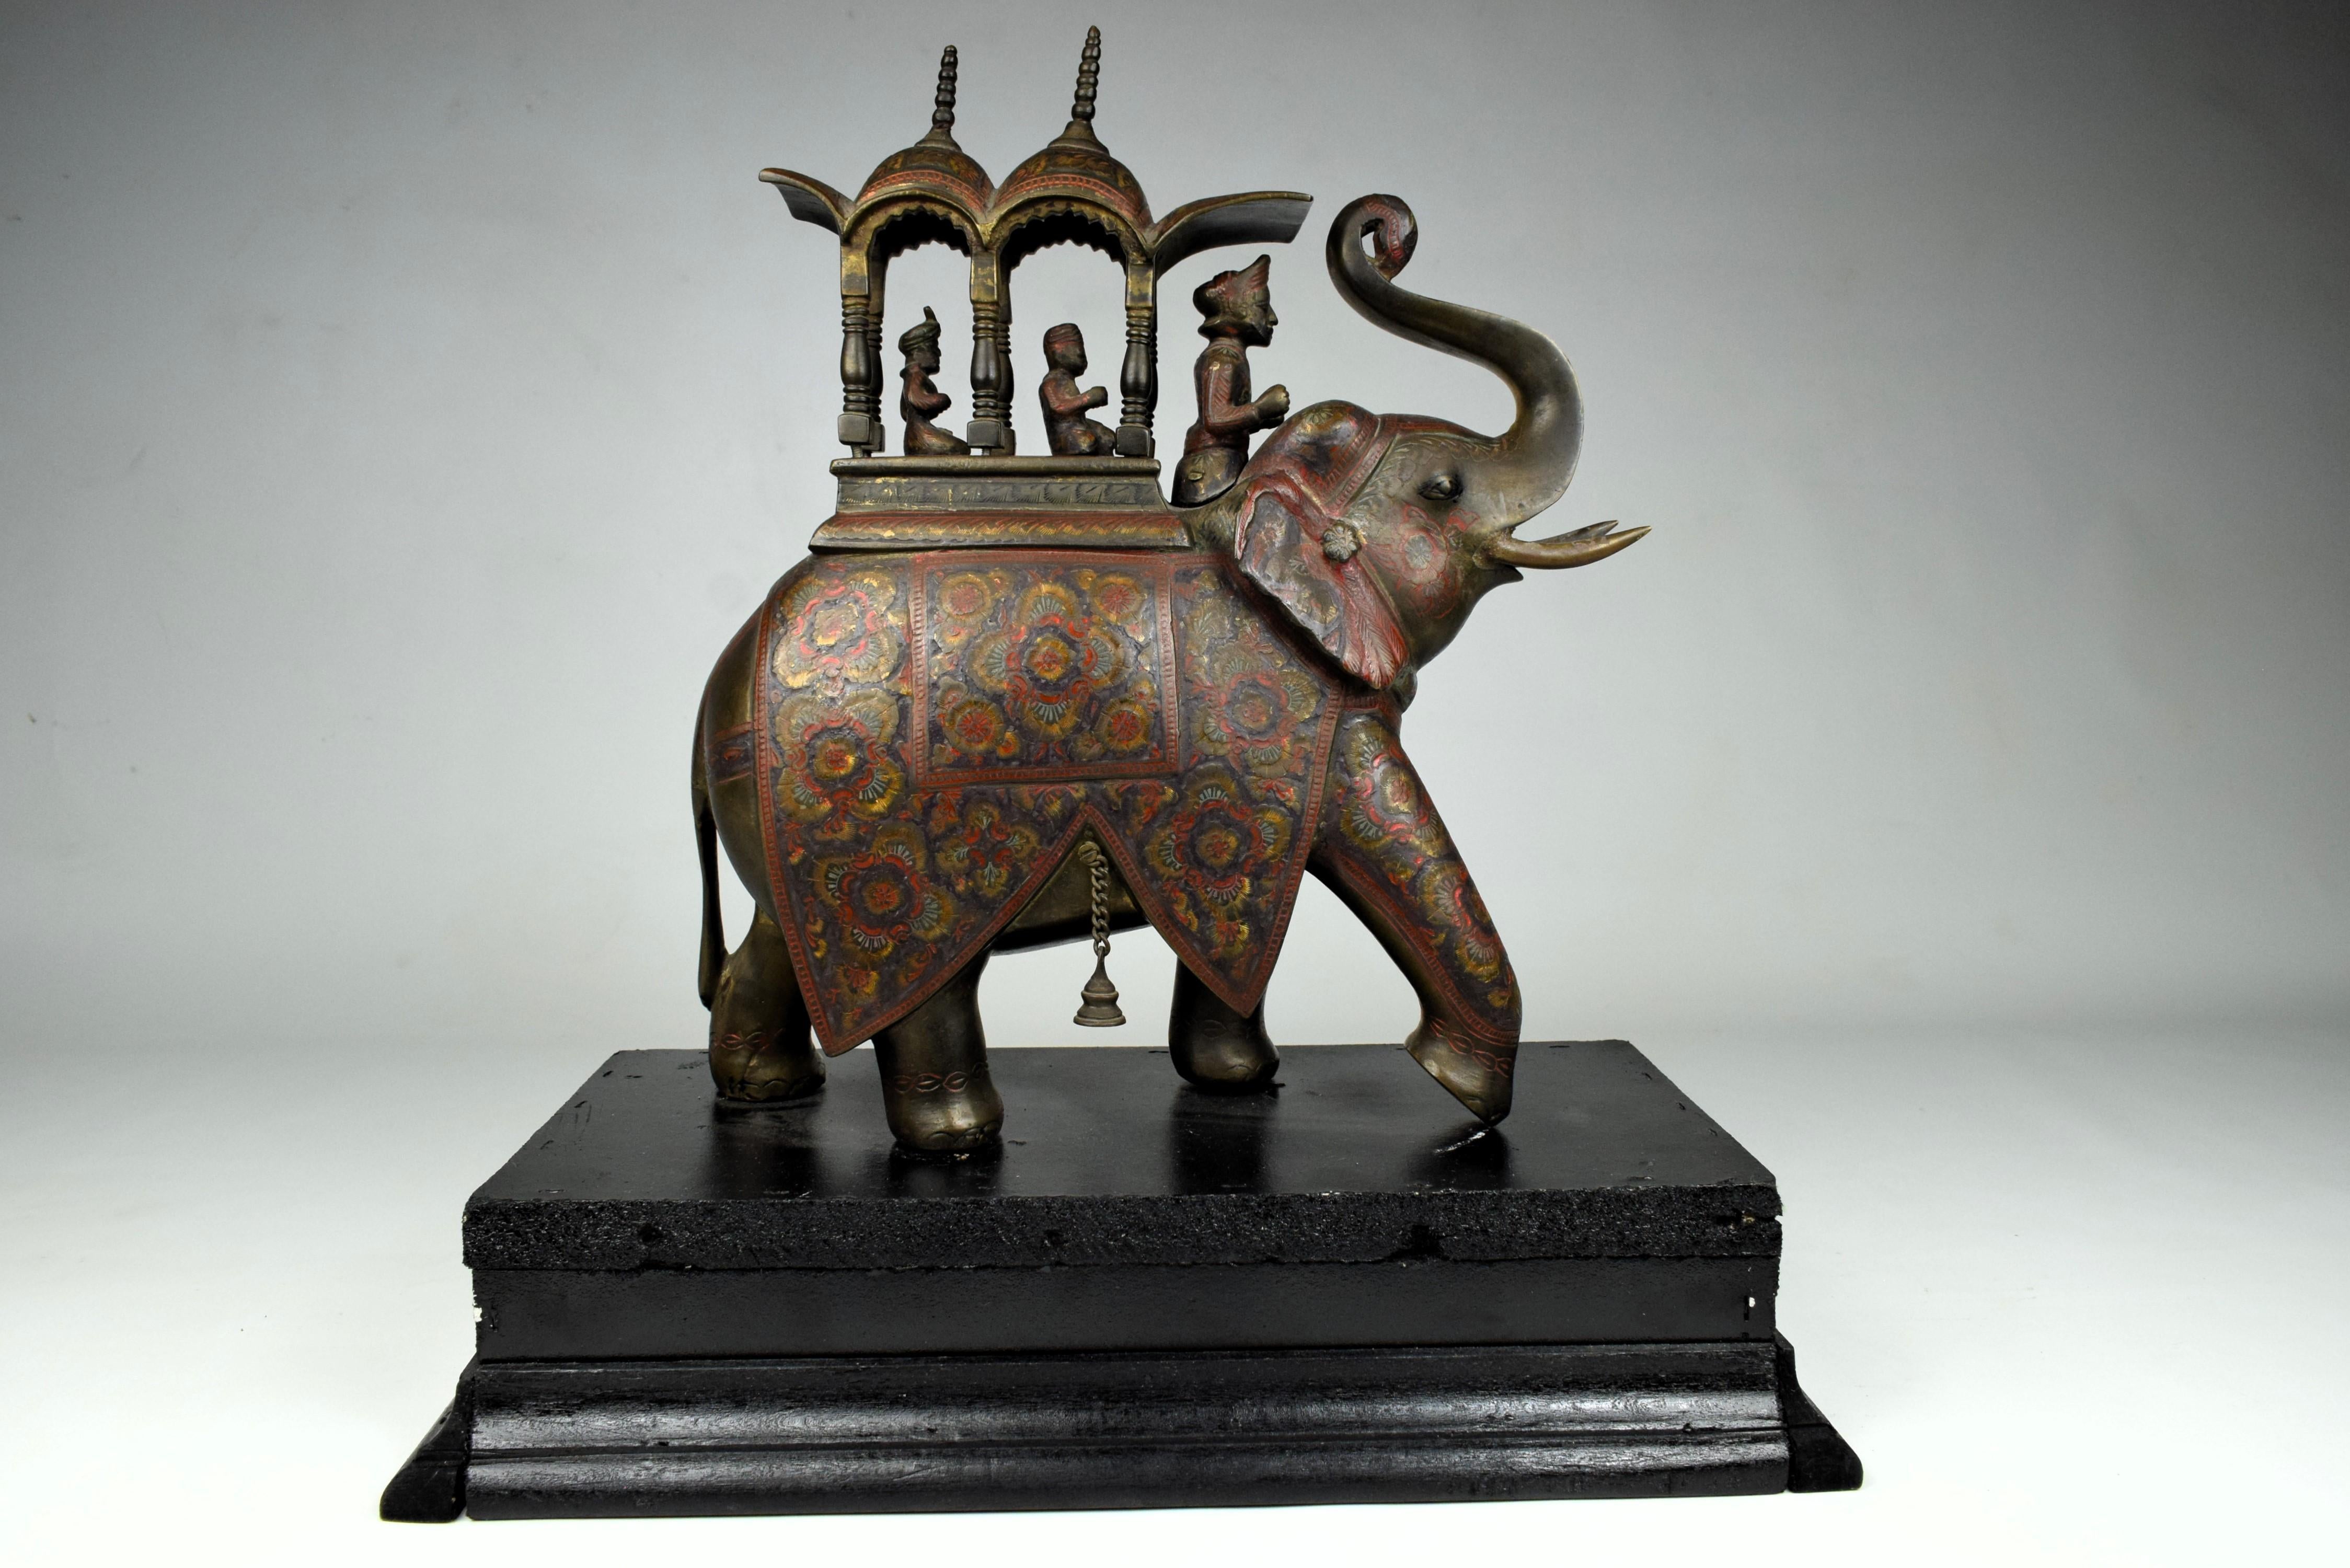 
A brass Mughal Indian Hathi Howdah (elephant saddle) carrying a rider and two royals, adorned with enamel work, is a majestic and opulent representation of Mughal artistry. 

The Hathi Howdah is a grand creation, showcasing the Mughal craftsmanship